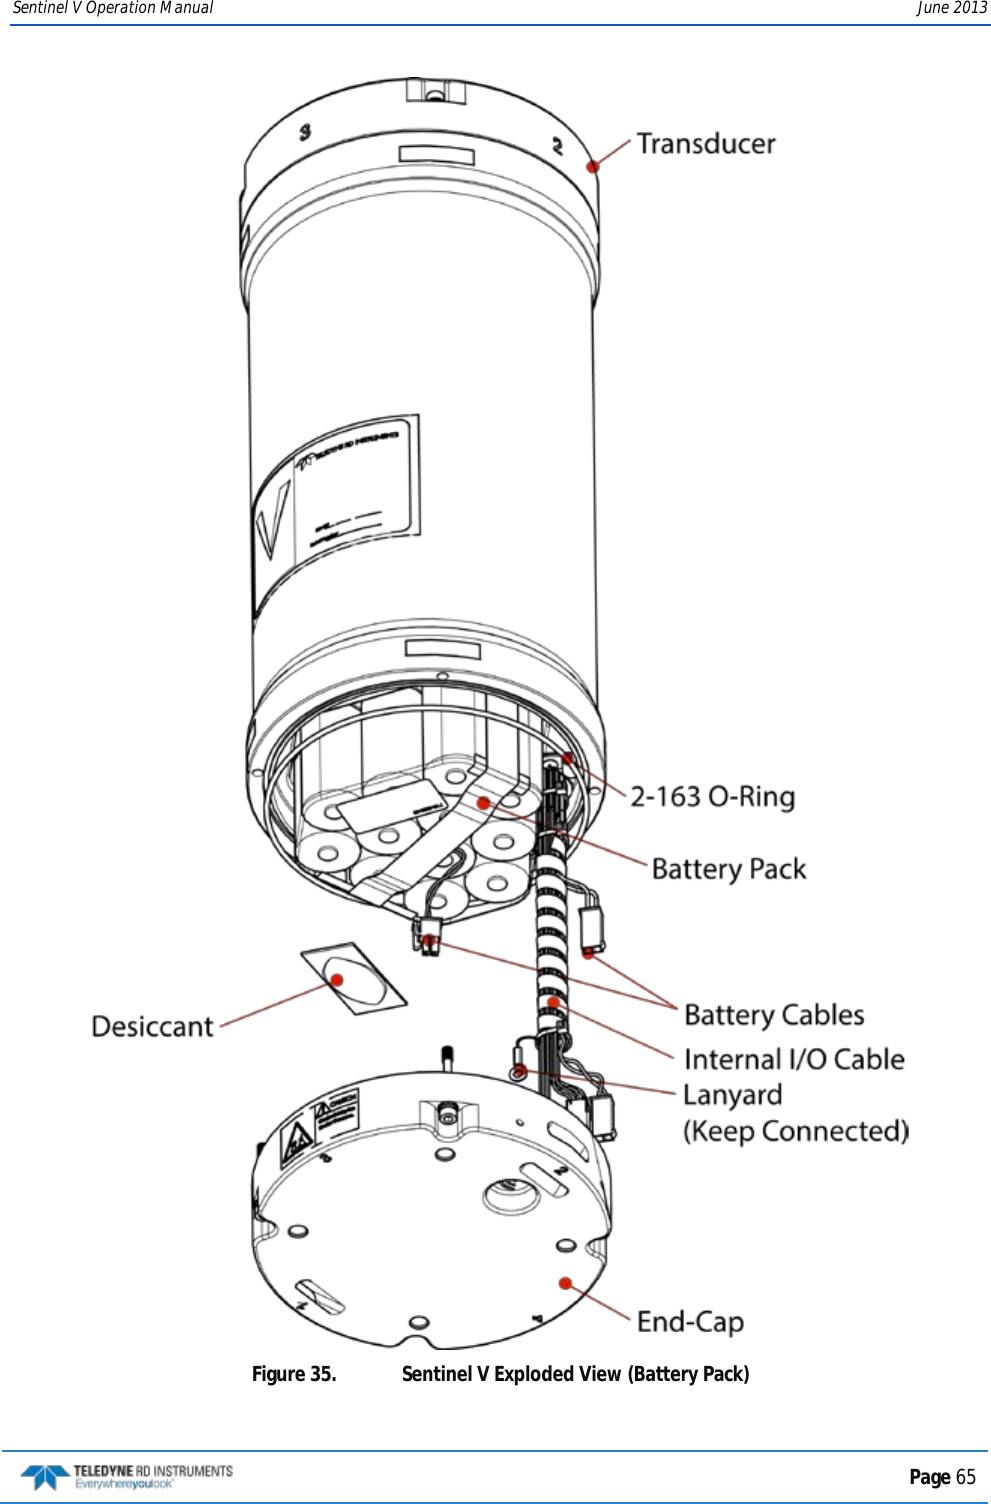 Sentinel V Operation Manual June 2013  Figure 35.  Sentinel V Exploded View (Battery Pack)   Page 65  